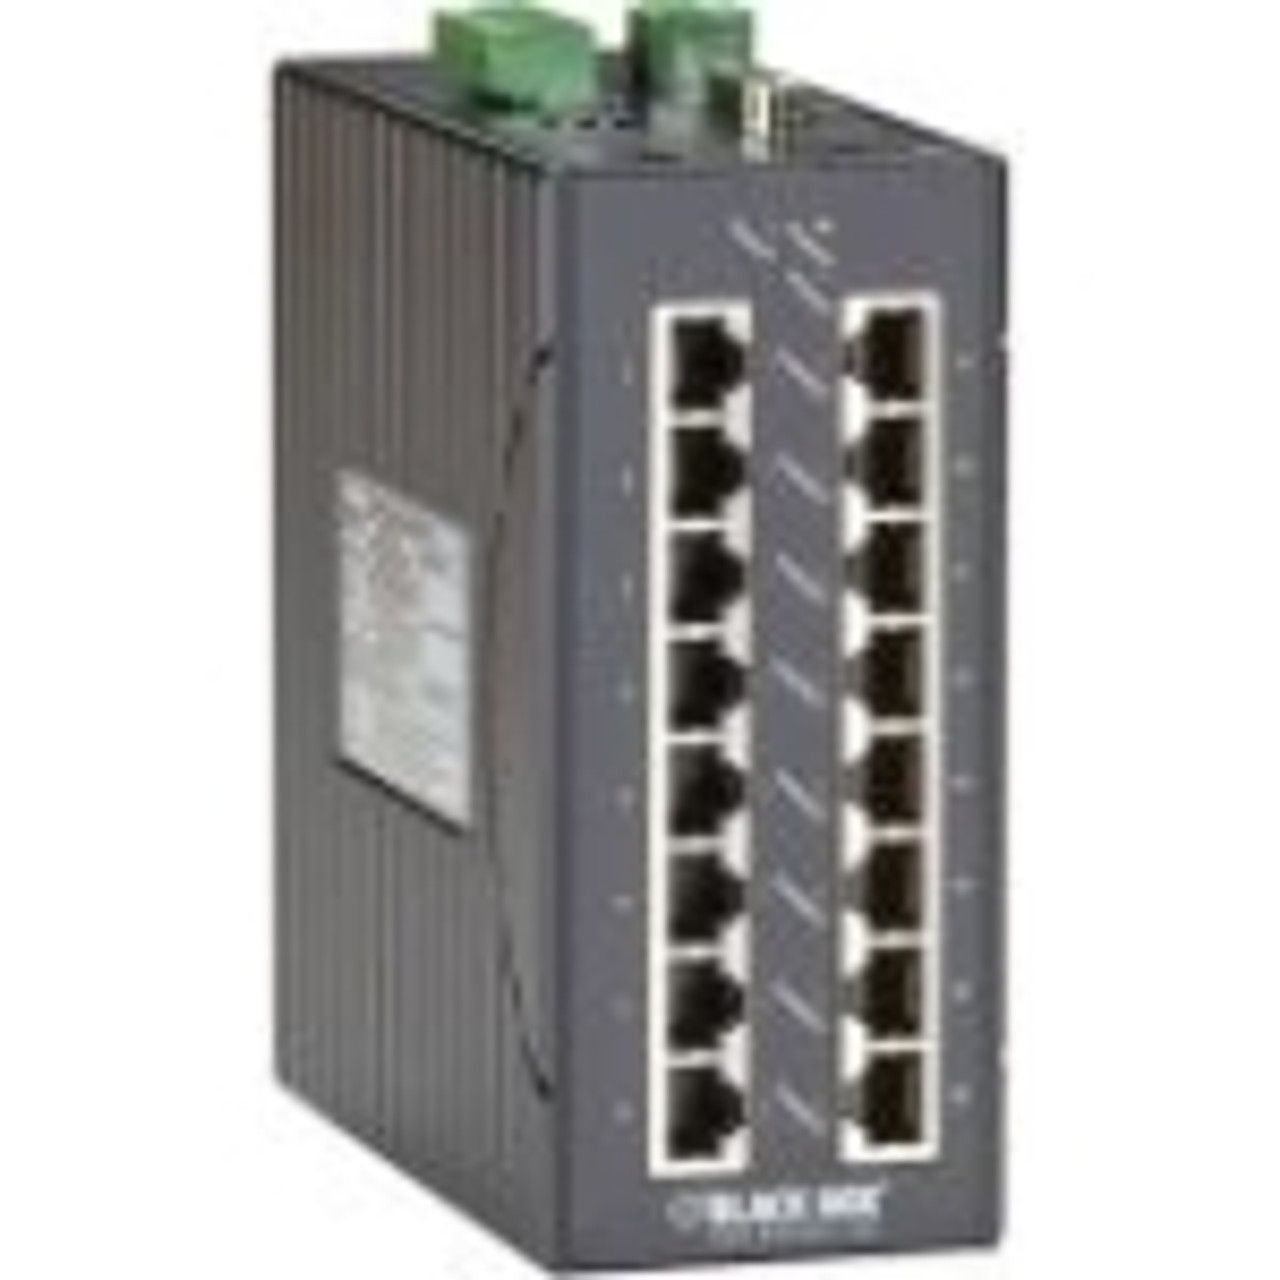 LEH1216A Black Box LEH1216A Ethernet Switch 16 Ports Manageable 10/100Base-T 16 x Network Twisted Pair Fast Ethernet 2 Layer Supported Rack-mountable,